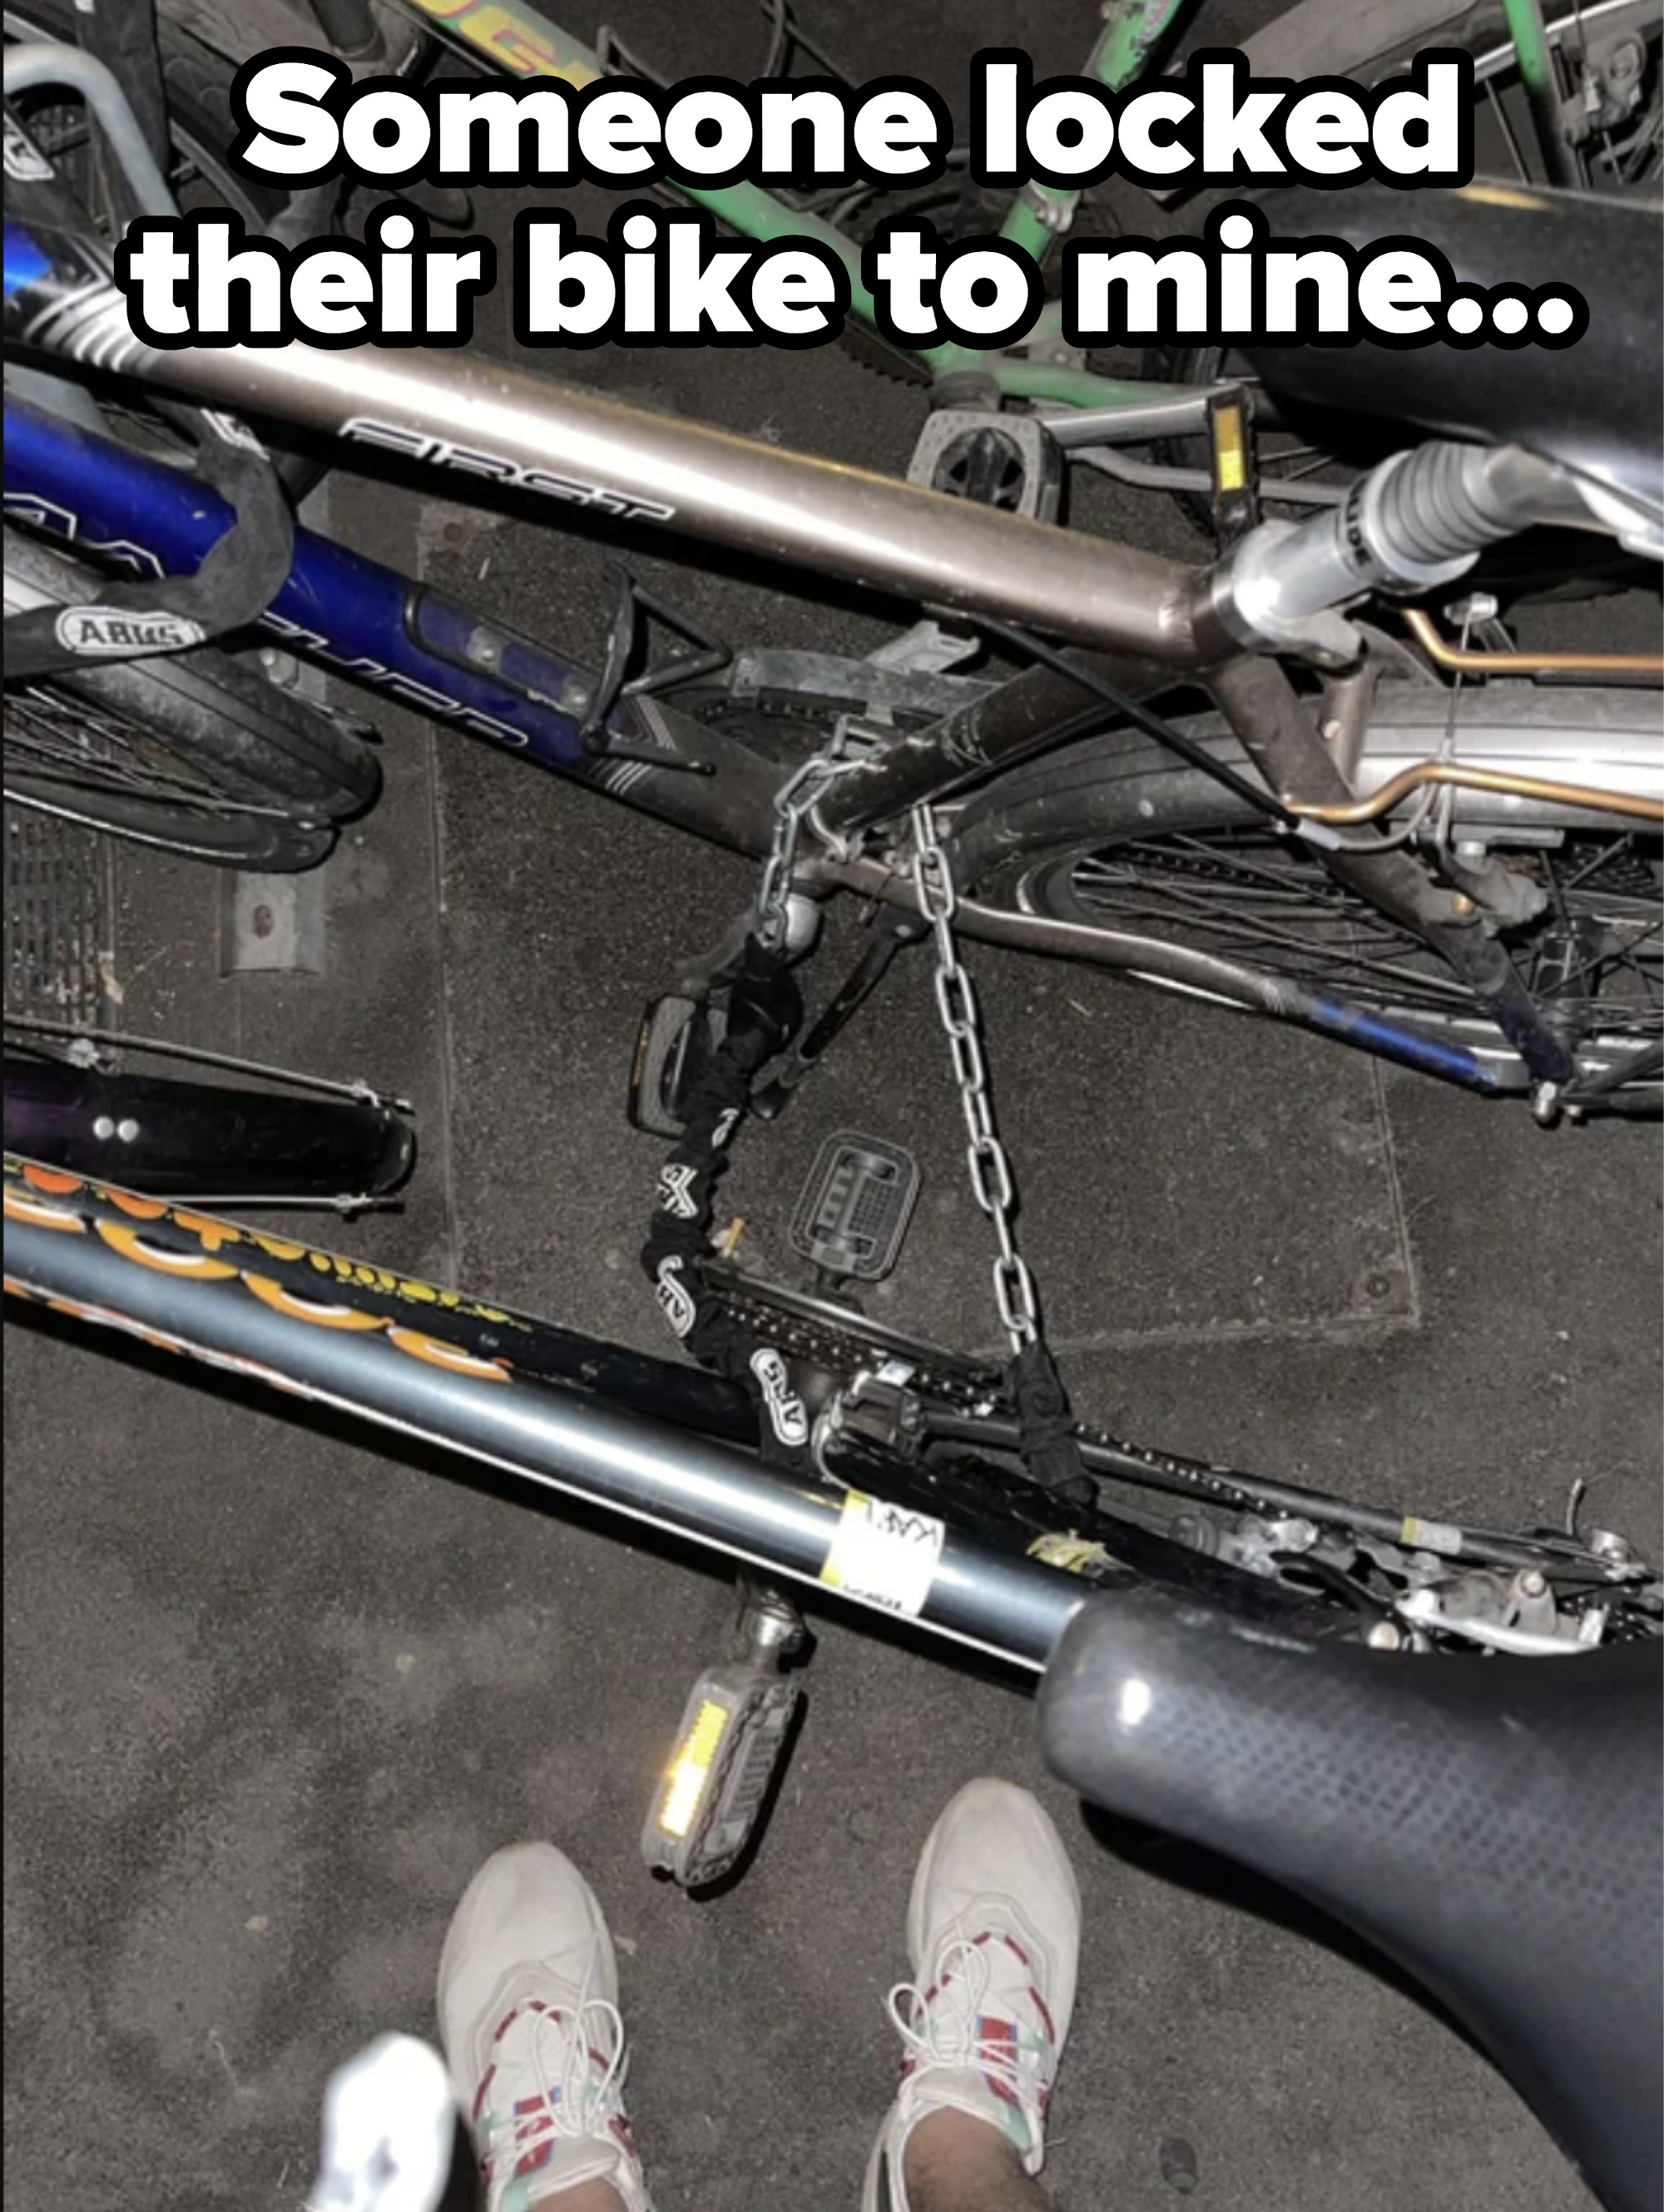 Two bikes locked together